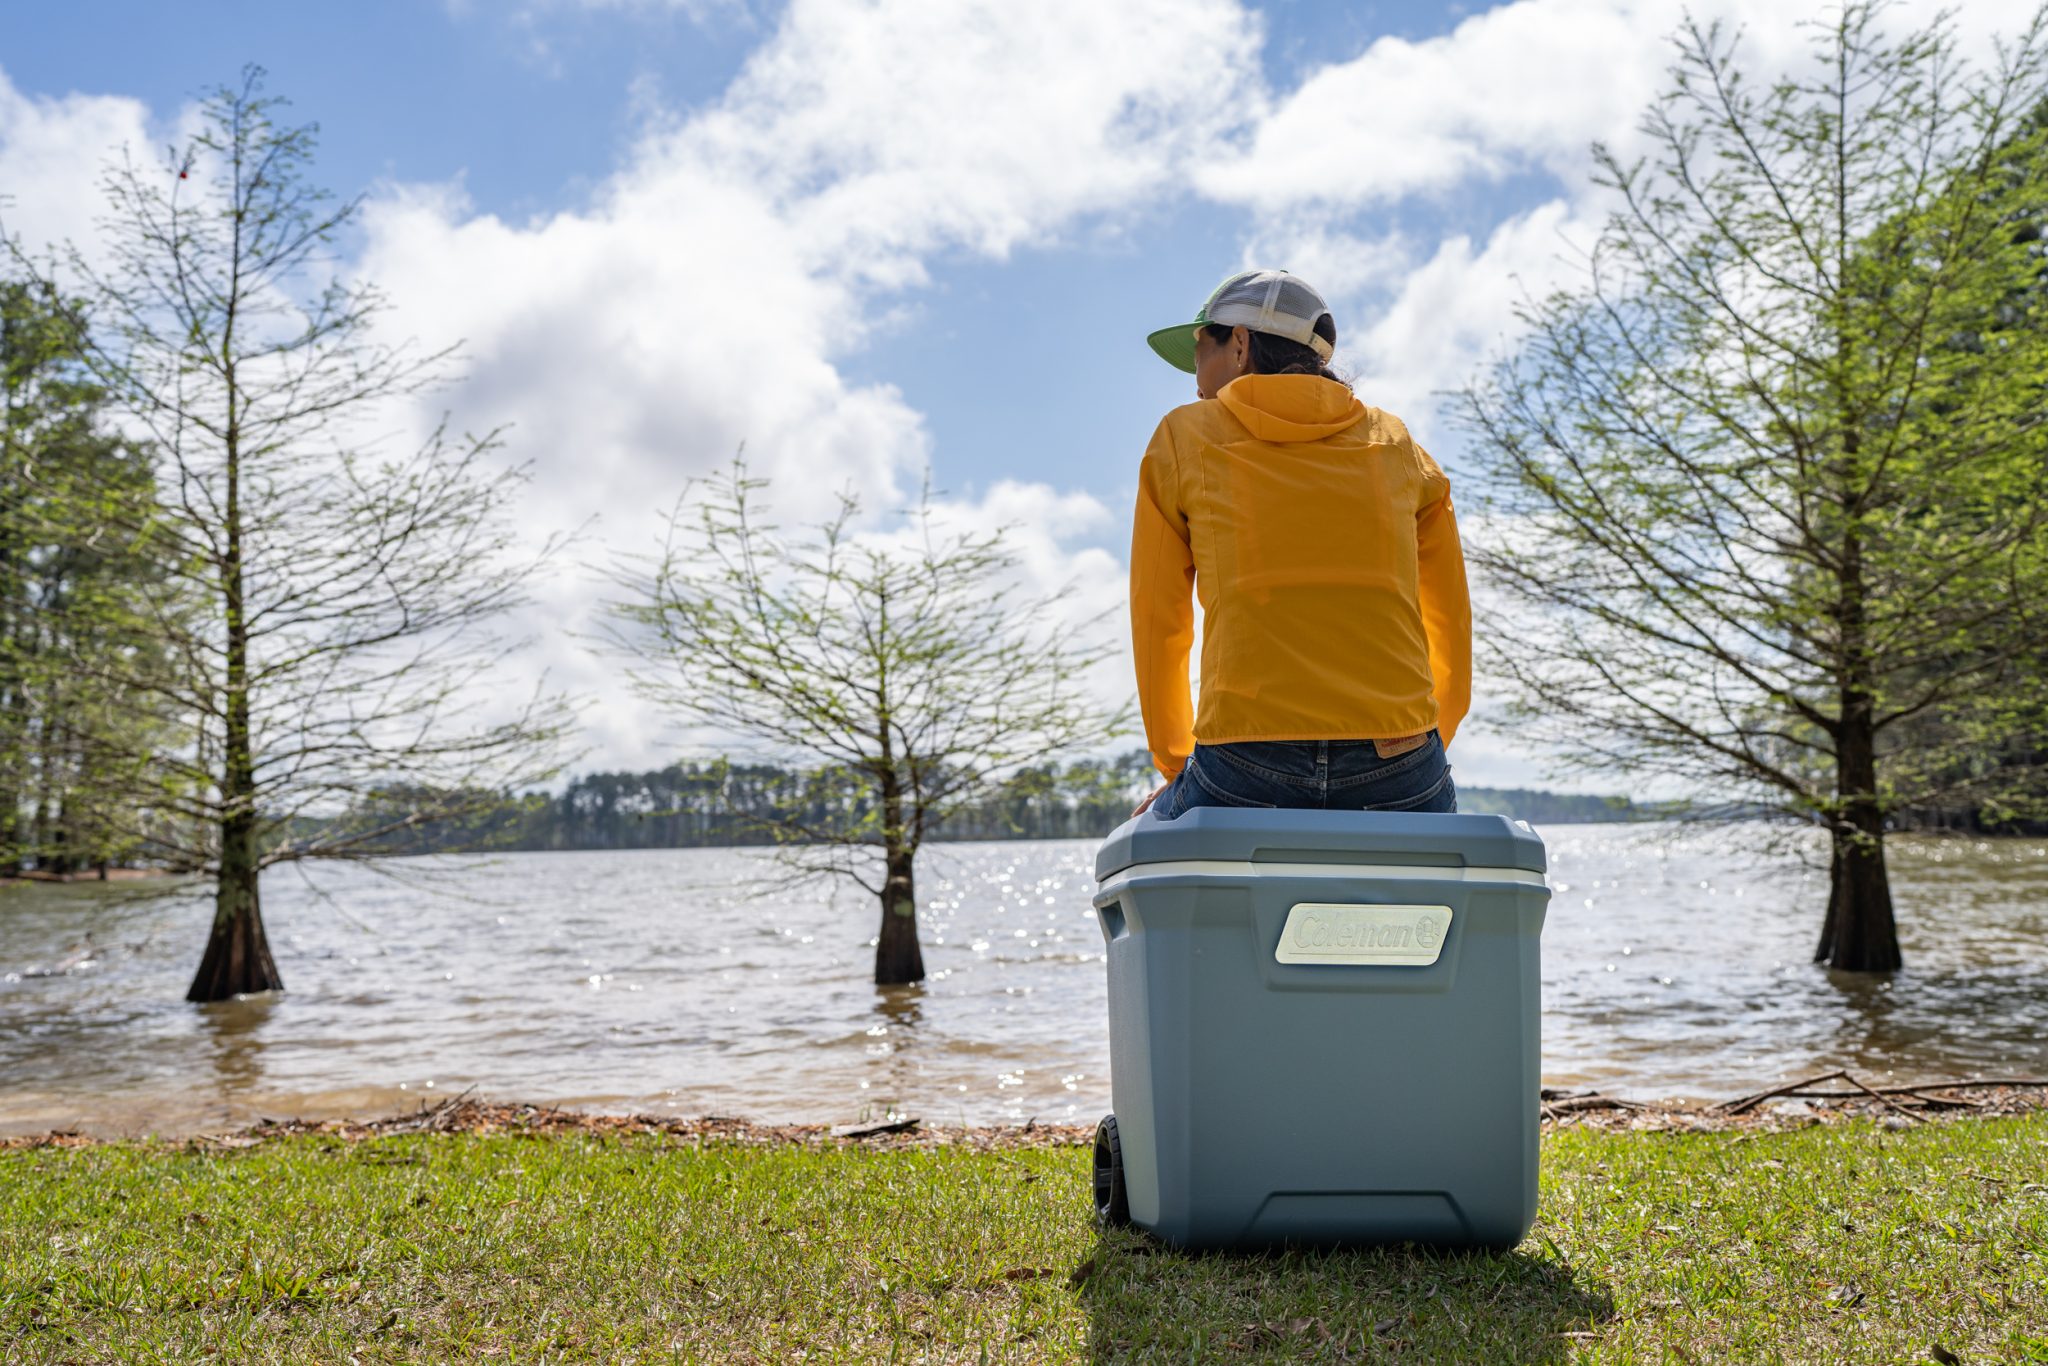 Erin McGrady is sitting on a blue Coleman Atlas 65-Quart Cooler. She is facing a lake and there are three cypress trees in the lake. She is wearing a yellow jacket and green trucker hat and jeans.